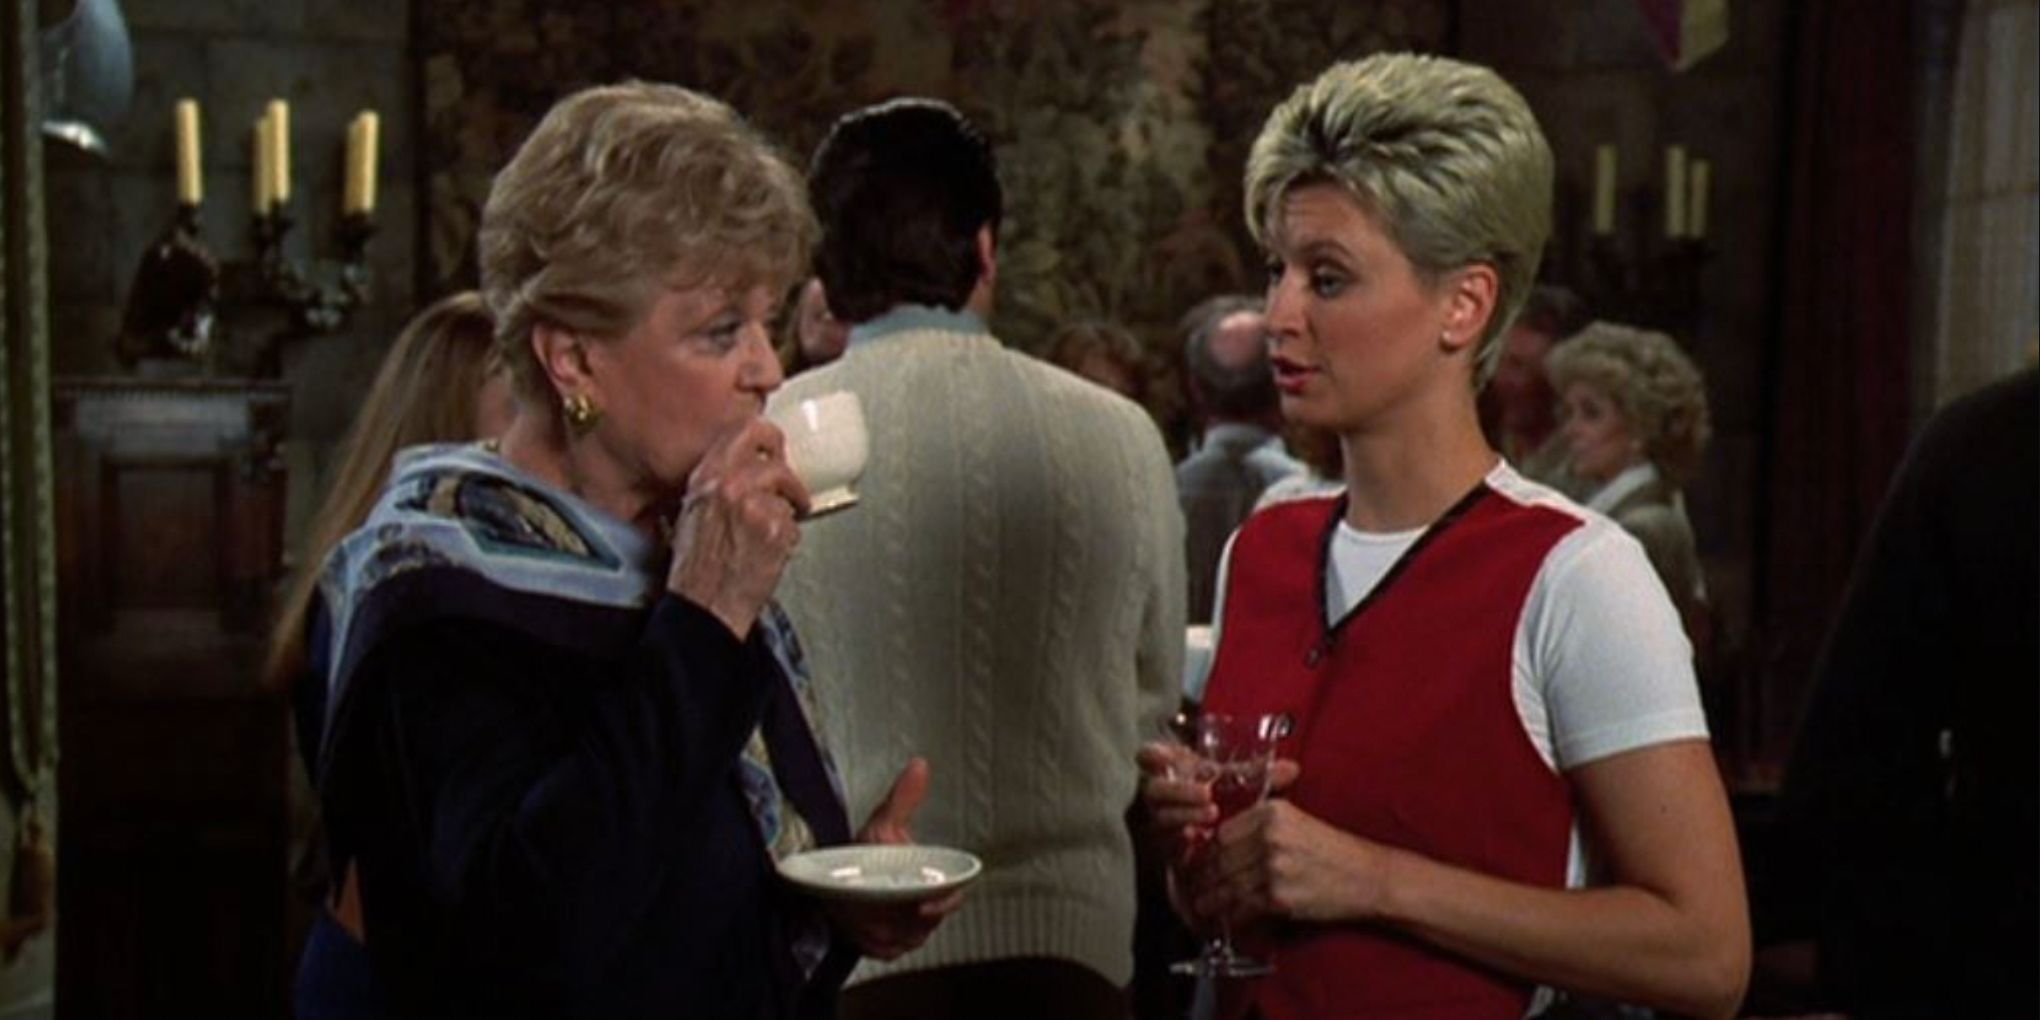 Jessica sips from a teacup in the Murder She Wrote episode Nans Ghost